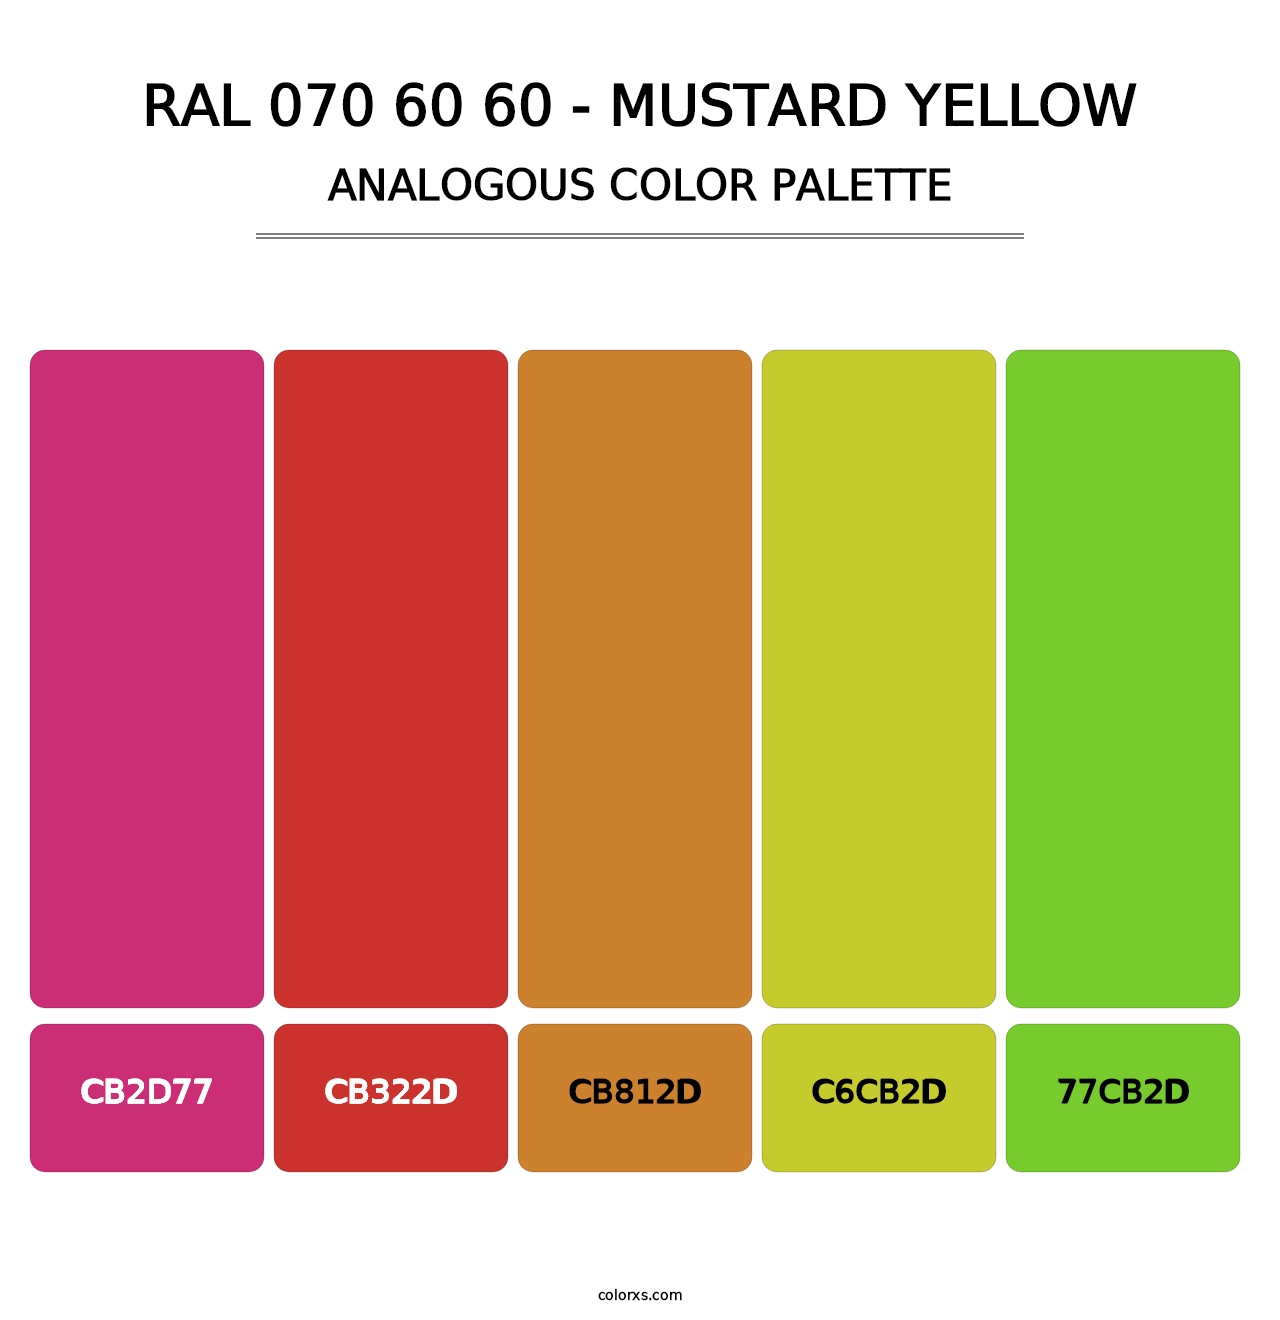 RAL 070 60 60 - Mustard Yellow - Analogous Color Palette